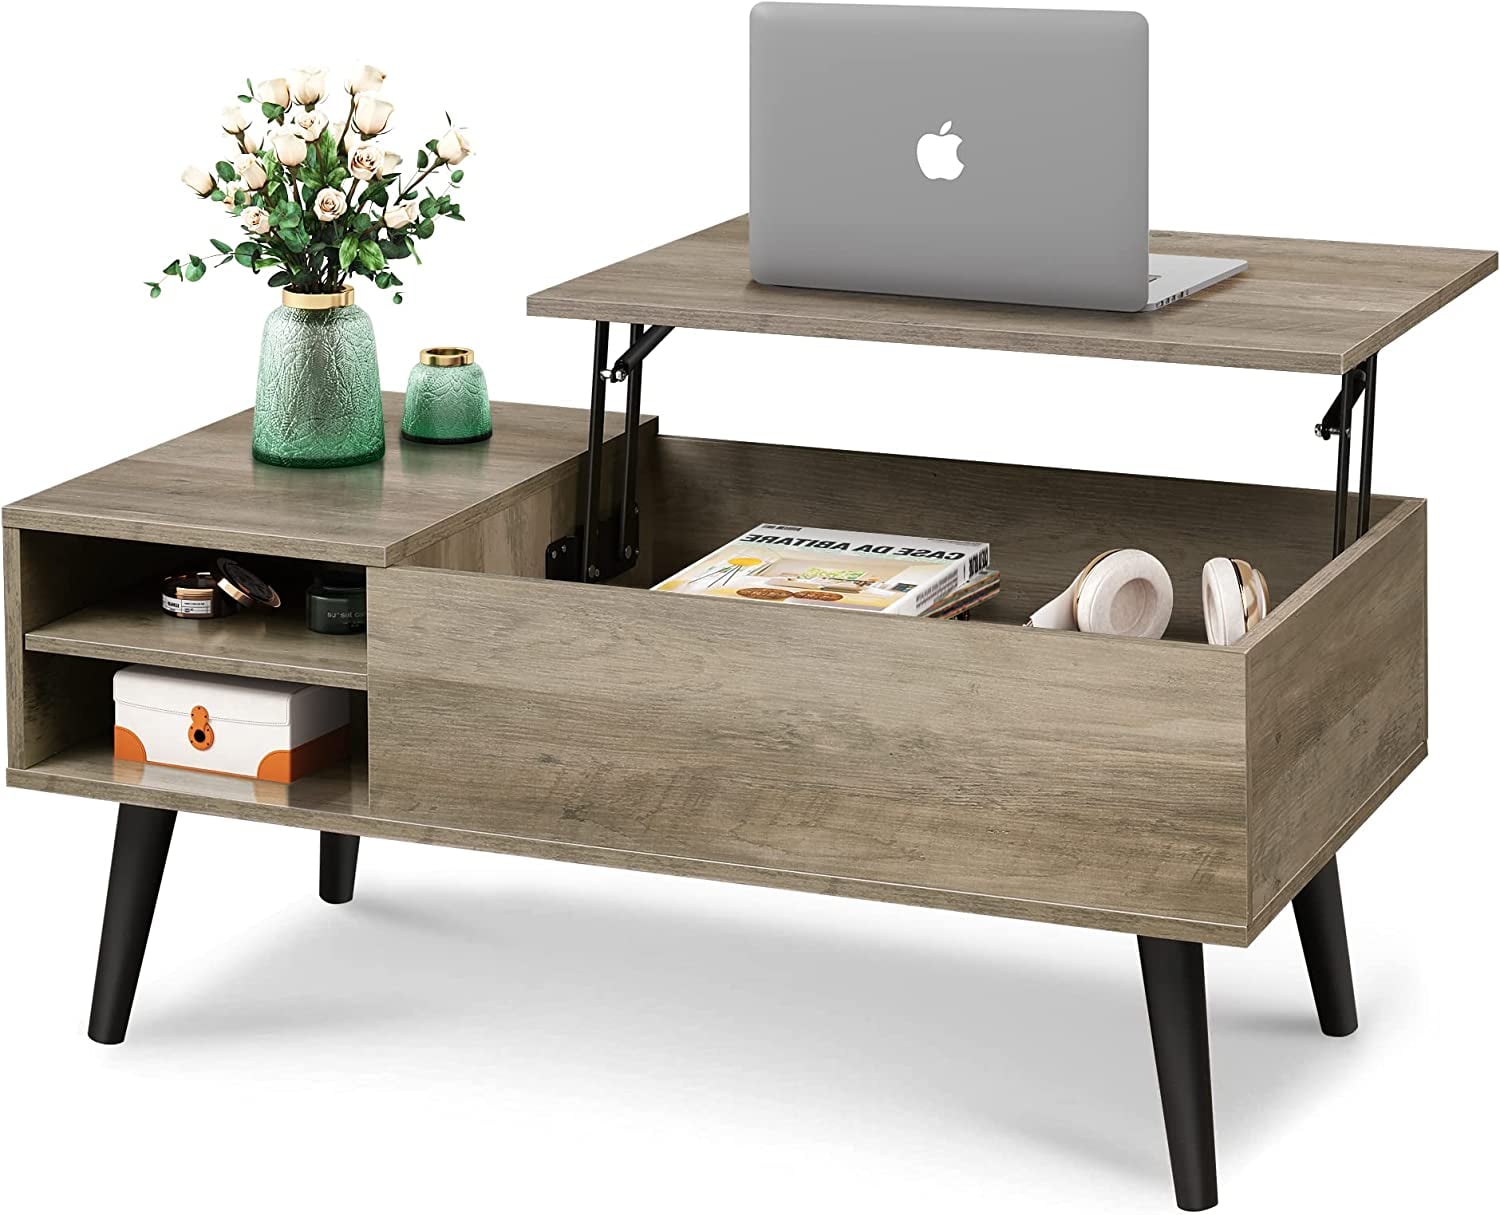 7 Best Coffee Tables With Storage For Small Spaces